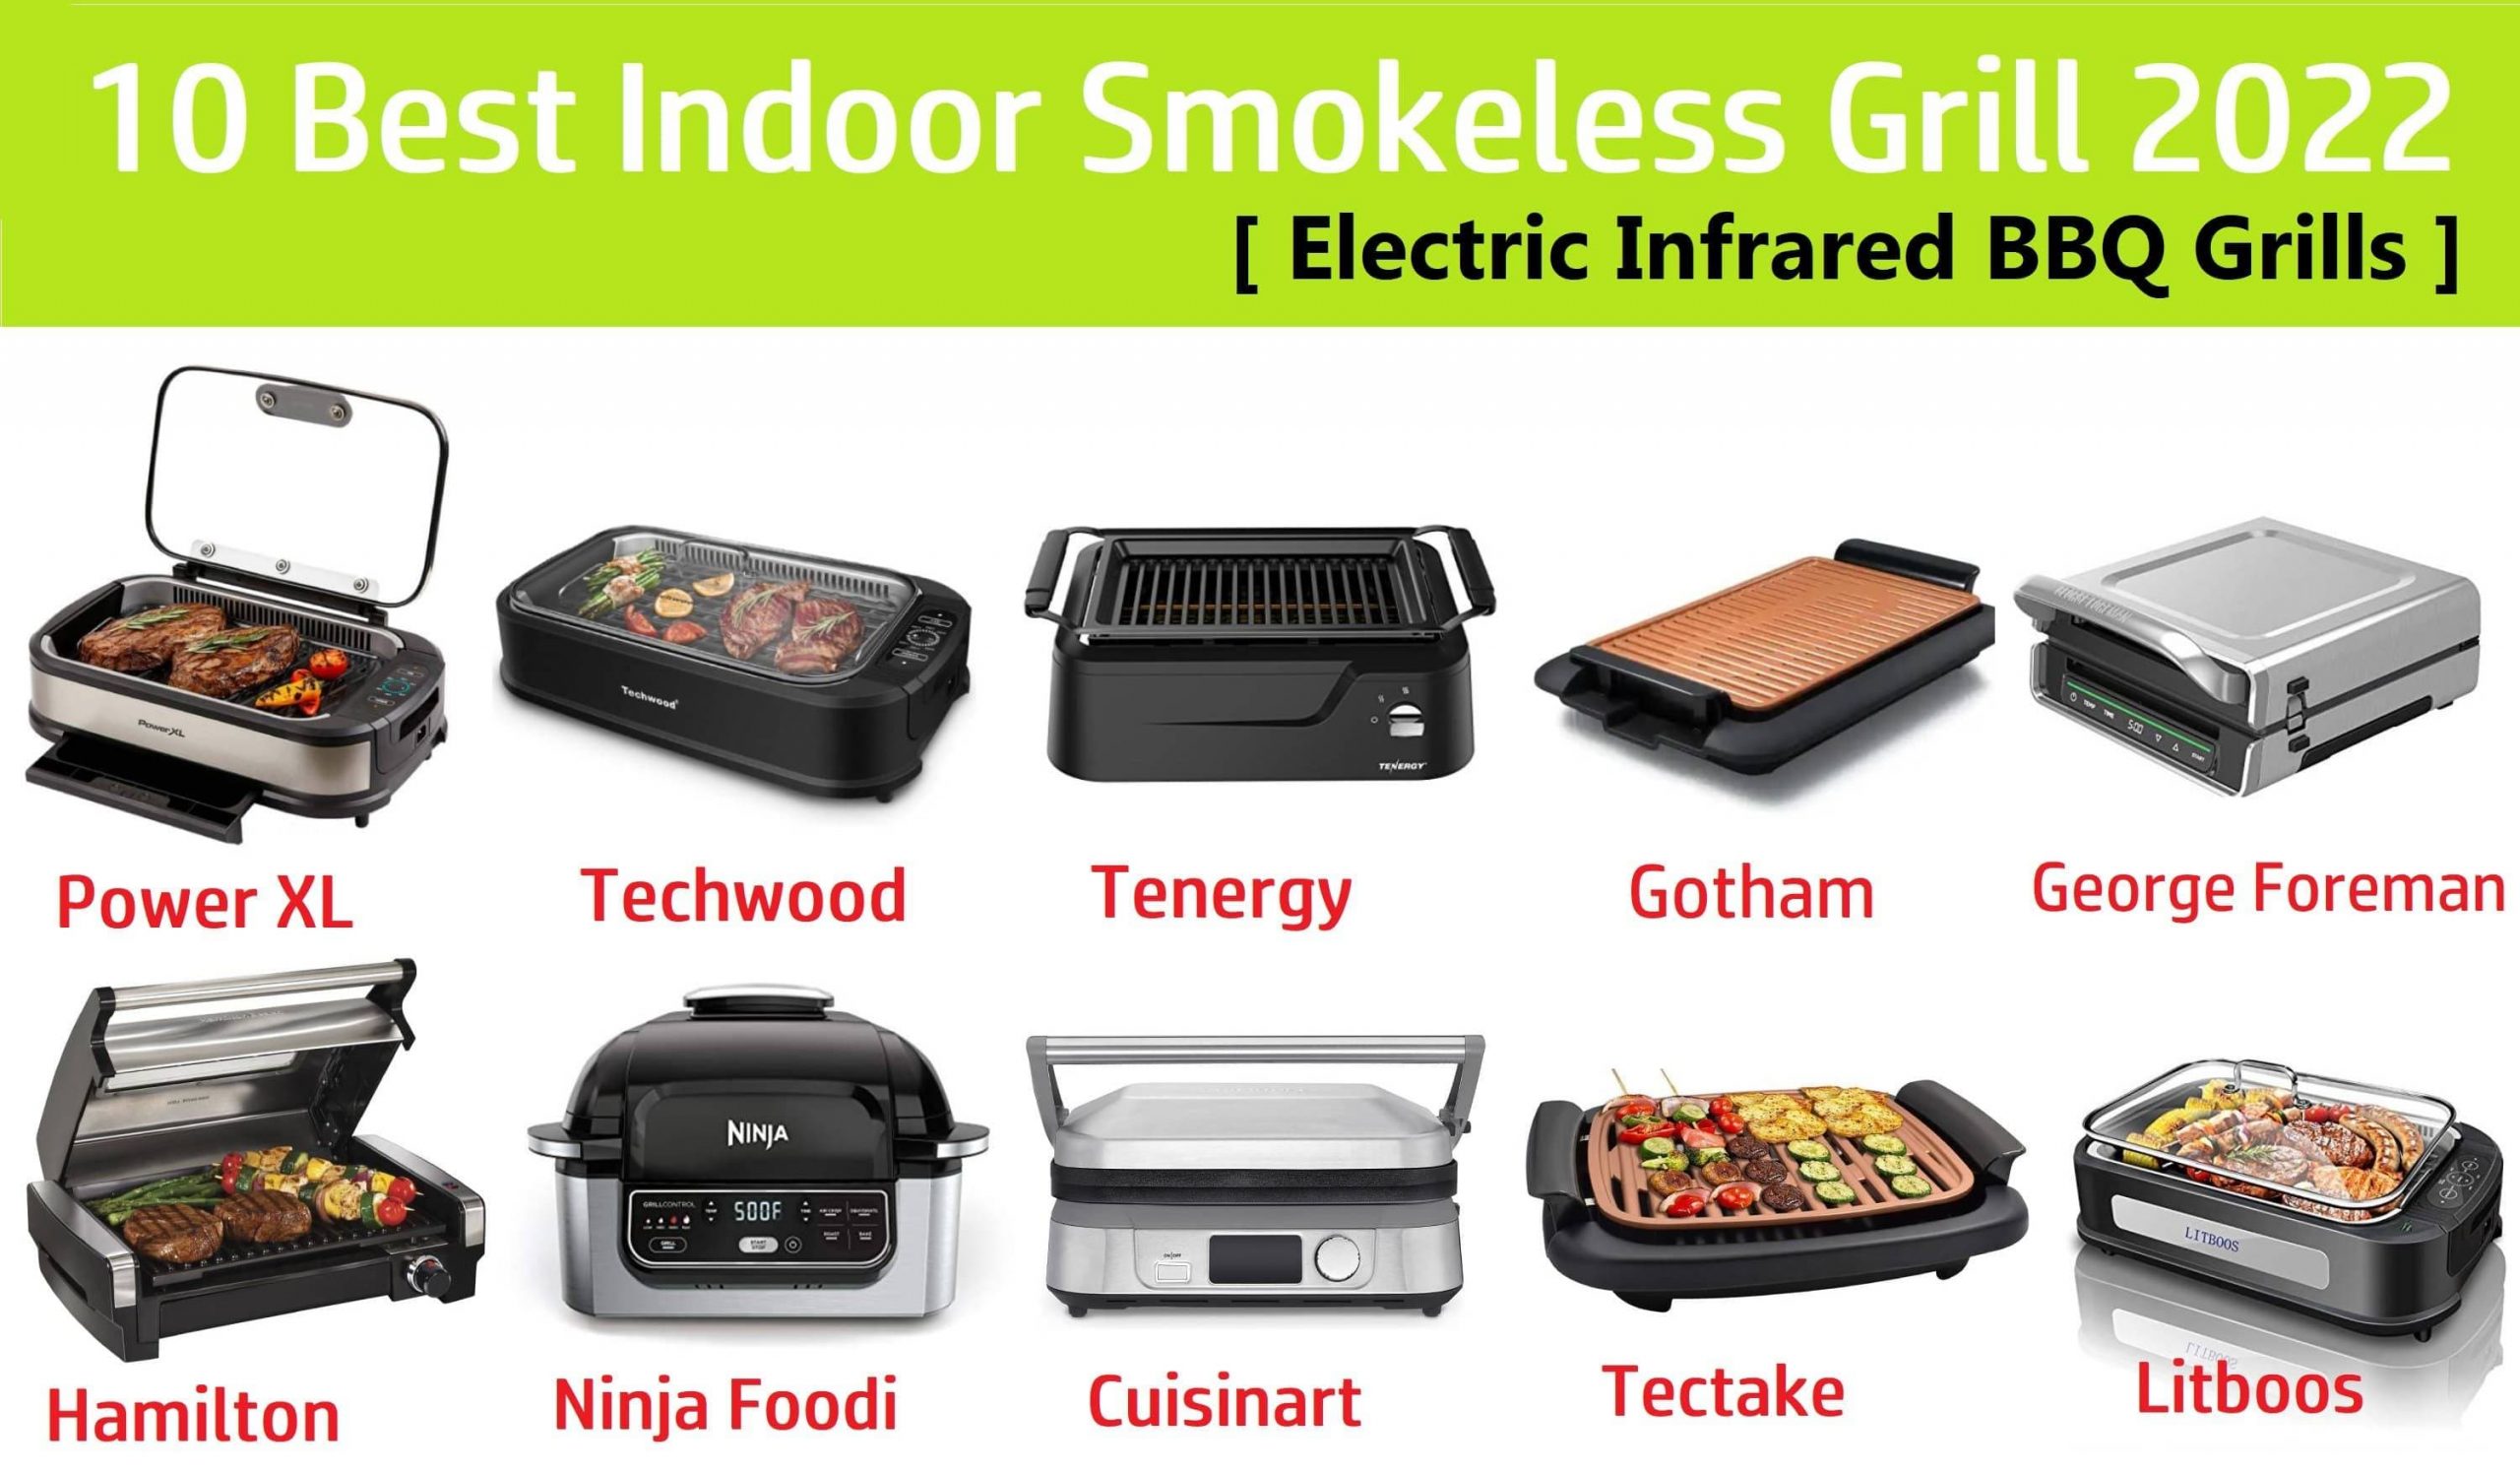 10 Best Indoor Smokeless Grill 2021 Electric Infrared BBQ Grills review and comparison